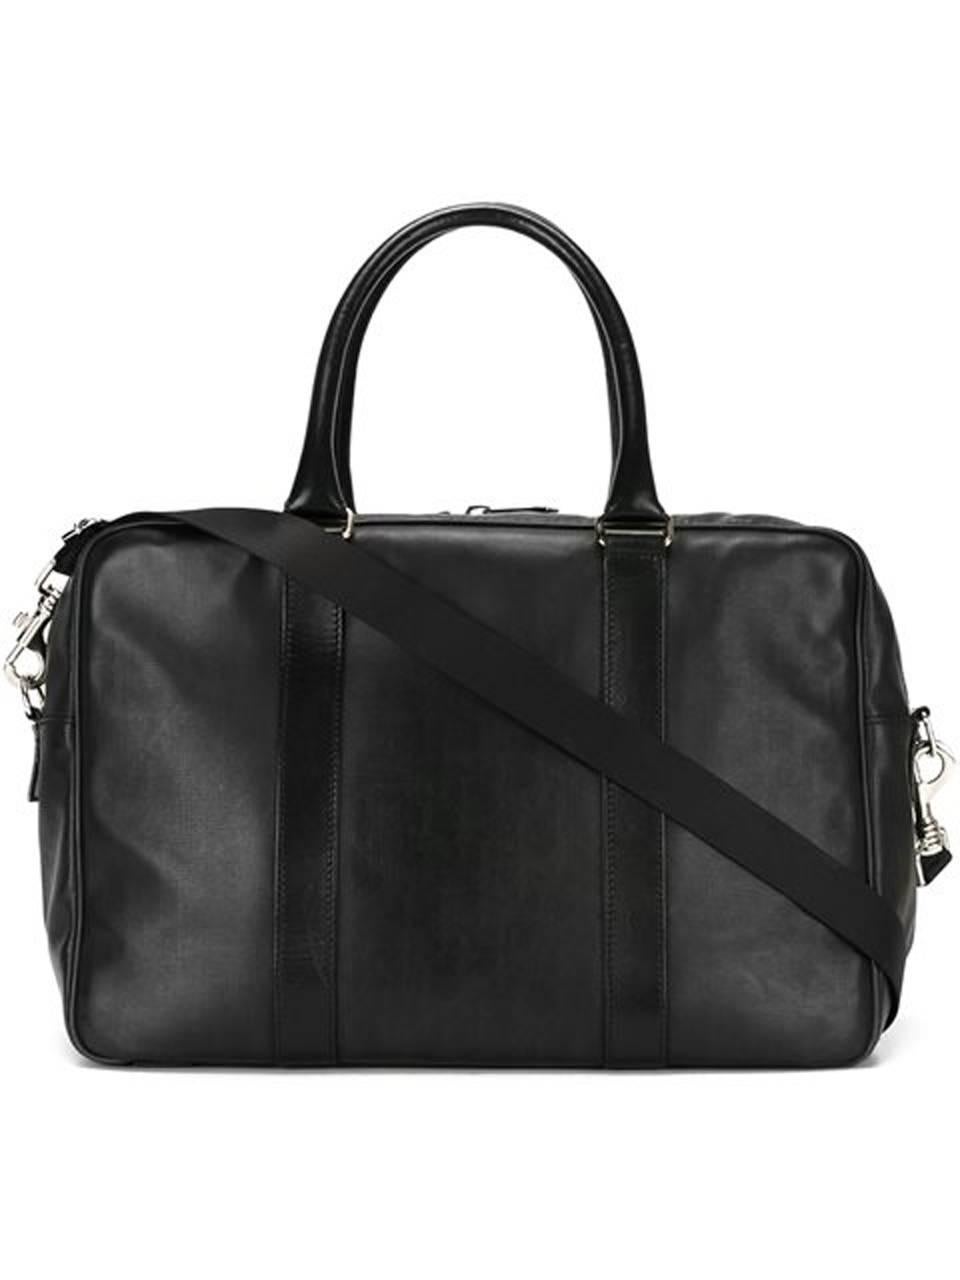 Christian Dior black leather monogram canvas briefcase  featuring black boxcalf leather handles & details, iconic Dior monogram pattern, a front slip pocket, silver-tone hardware, round top handles, a detachable and adjustable shoulder strap, a top